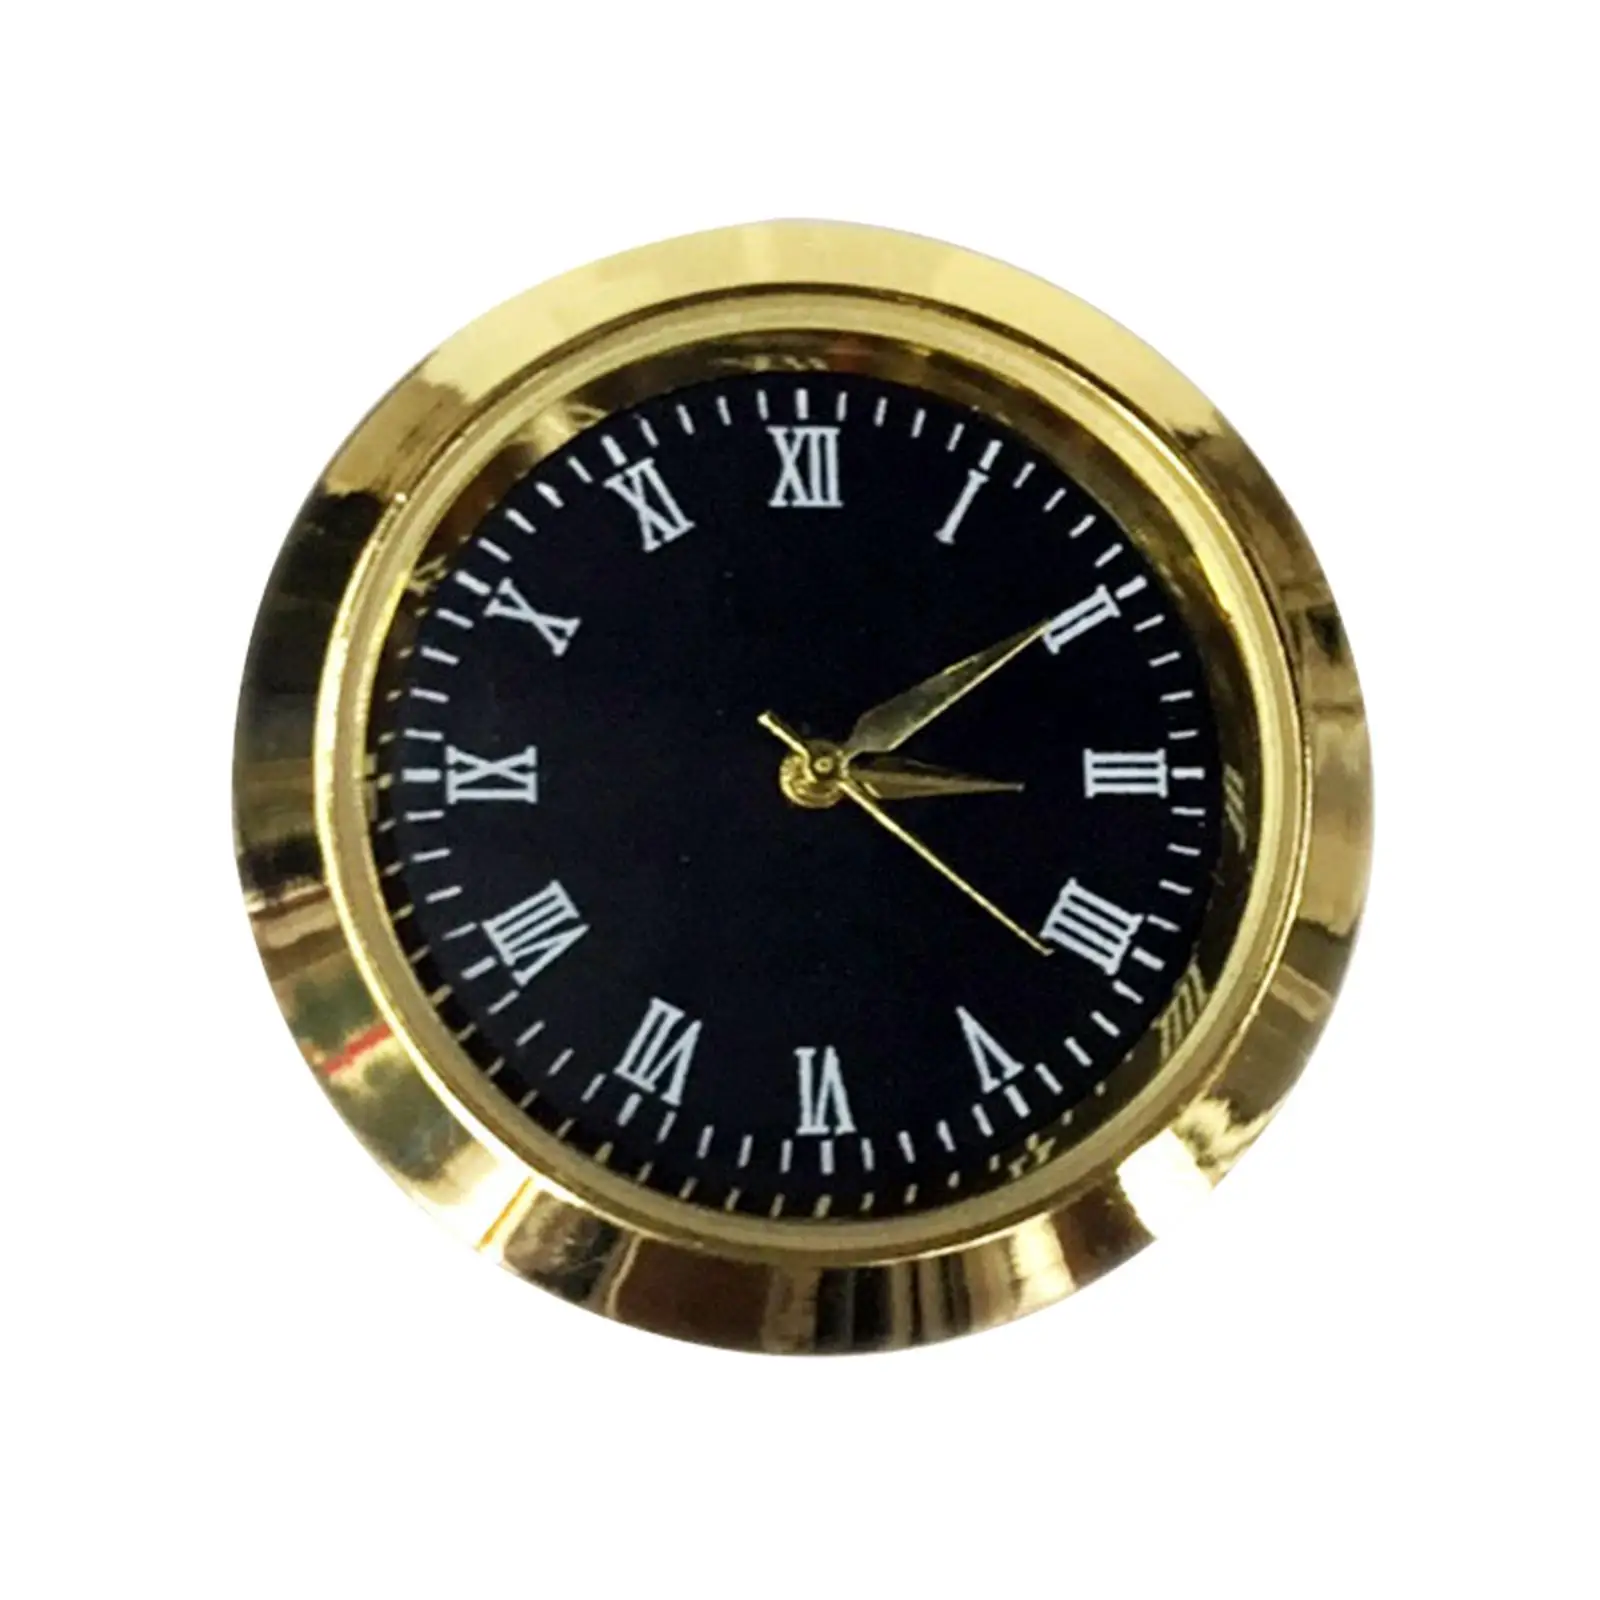 1-7/16 inch (36 mm) Round Clock Insert Clock Face for up Movement for School